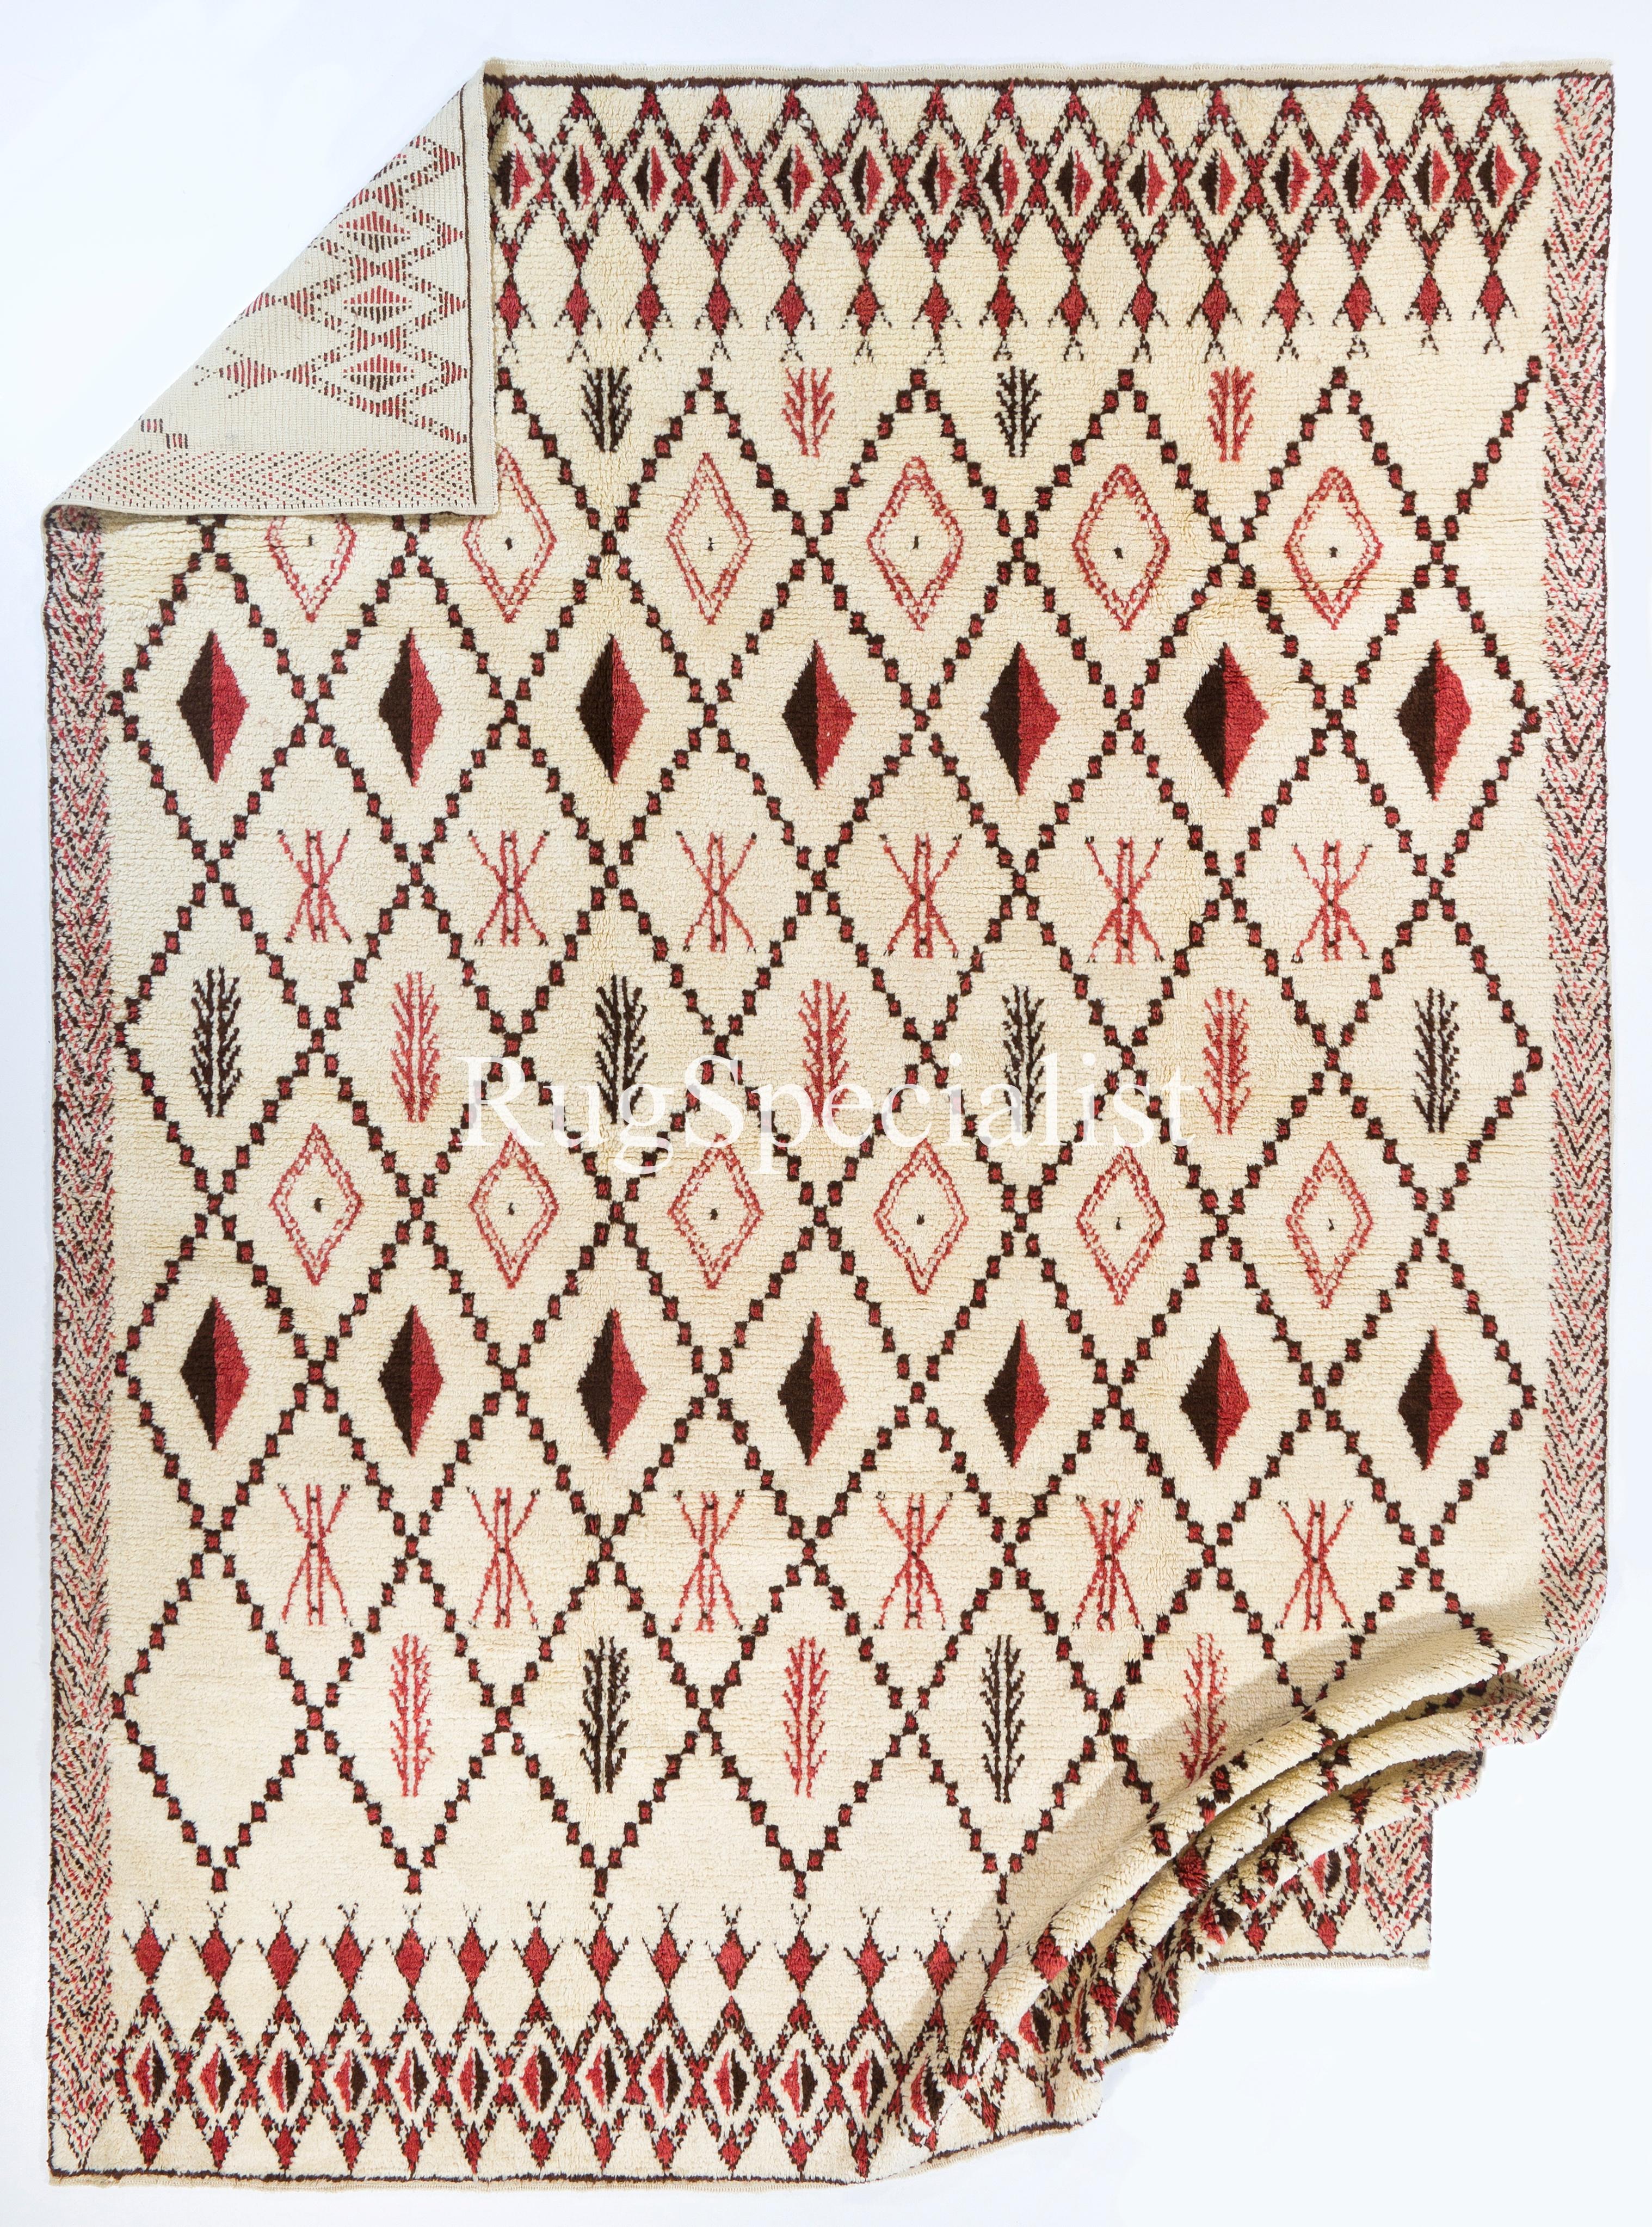 Hand-Knotted 10.5x14.4 Ft Modern Moroccan Tulu Wool Rug in Beige, Red & Brown. Made-to-order For Sale